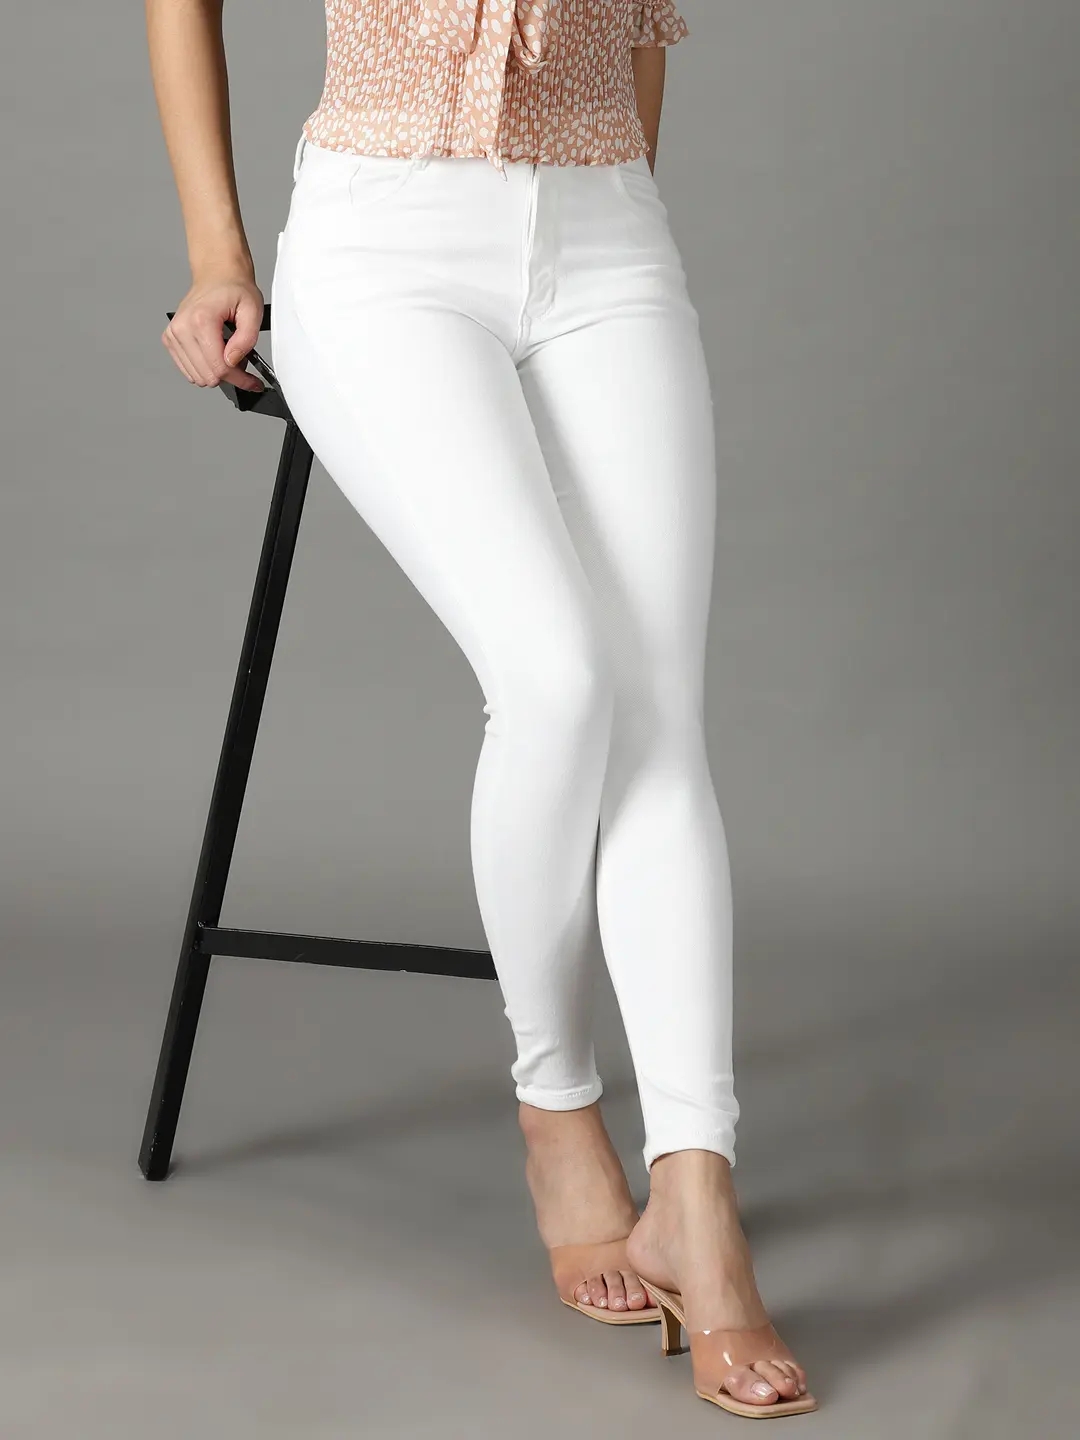 Showoff | SHOWOFF Women's Stretchable Clean Look White Slim Fit Jeans